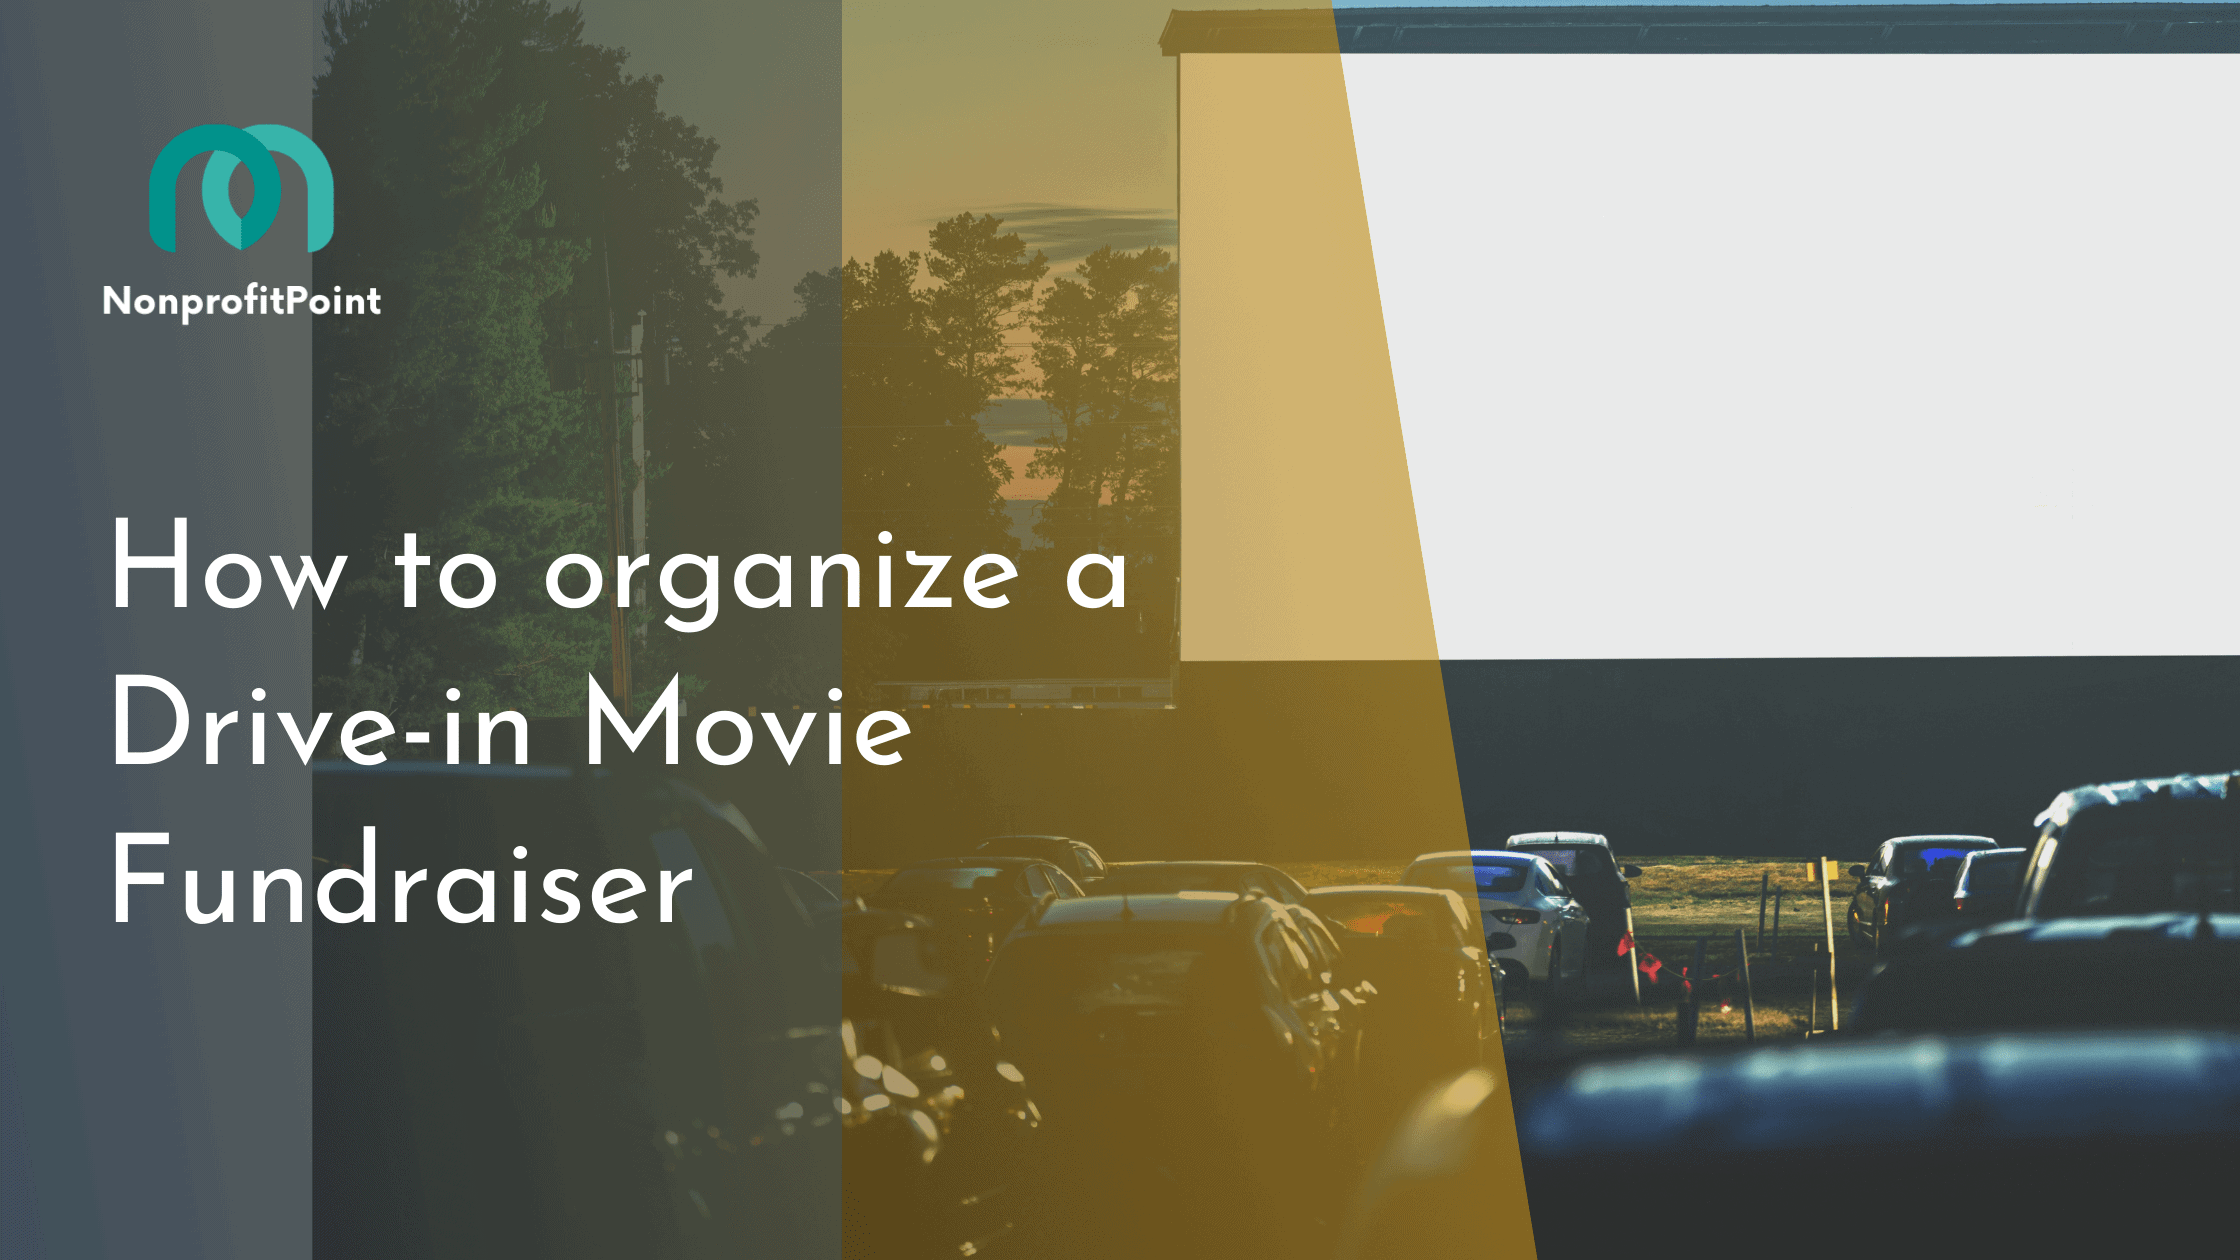 How to organize a Drive-in Movie Fundraiser